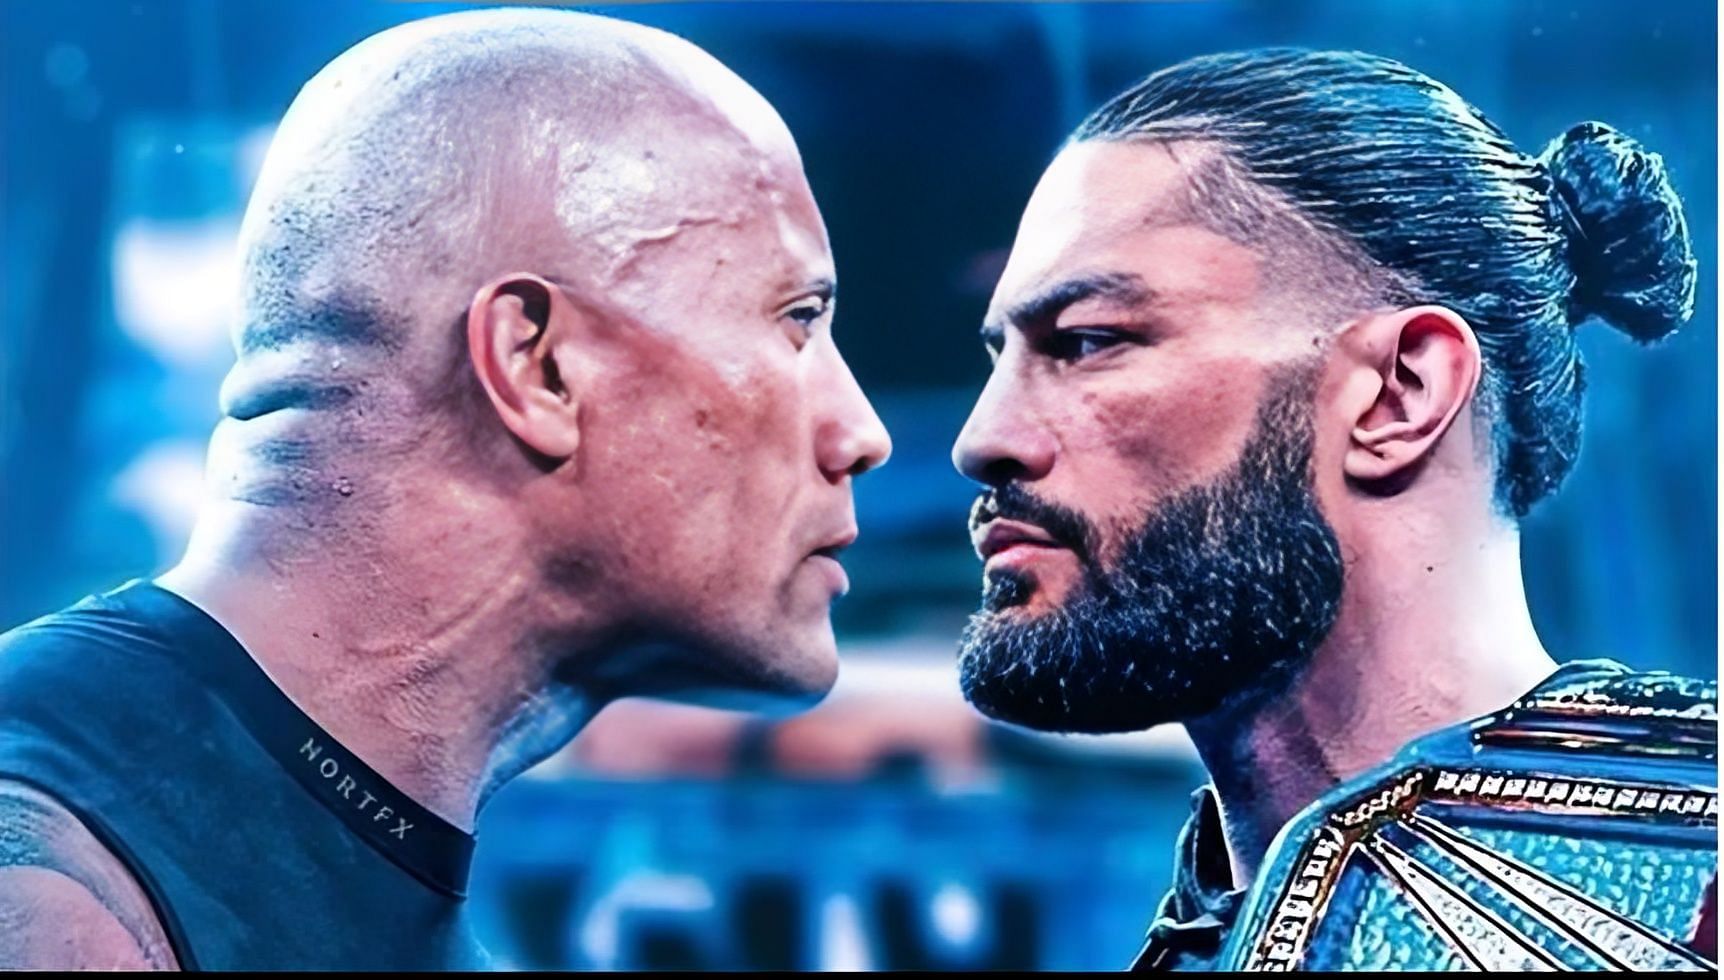 Roman Reigns vs The Rock is match for the ages